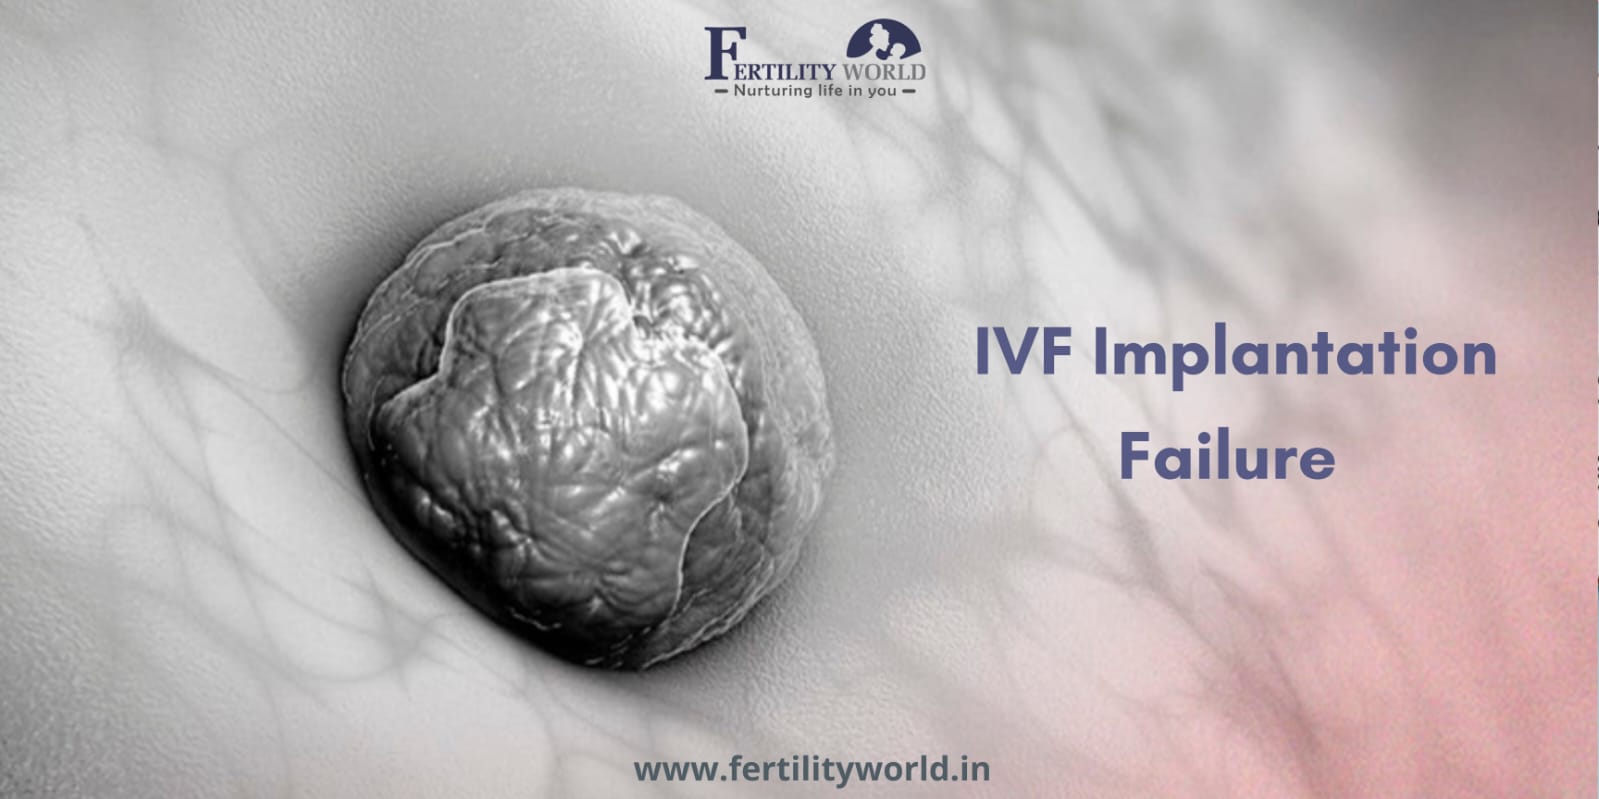 What are the reasons for IVF implantation failure?